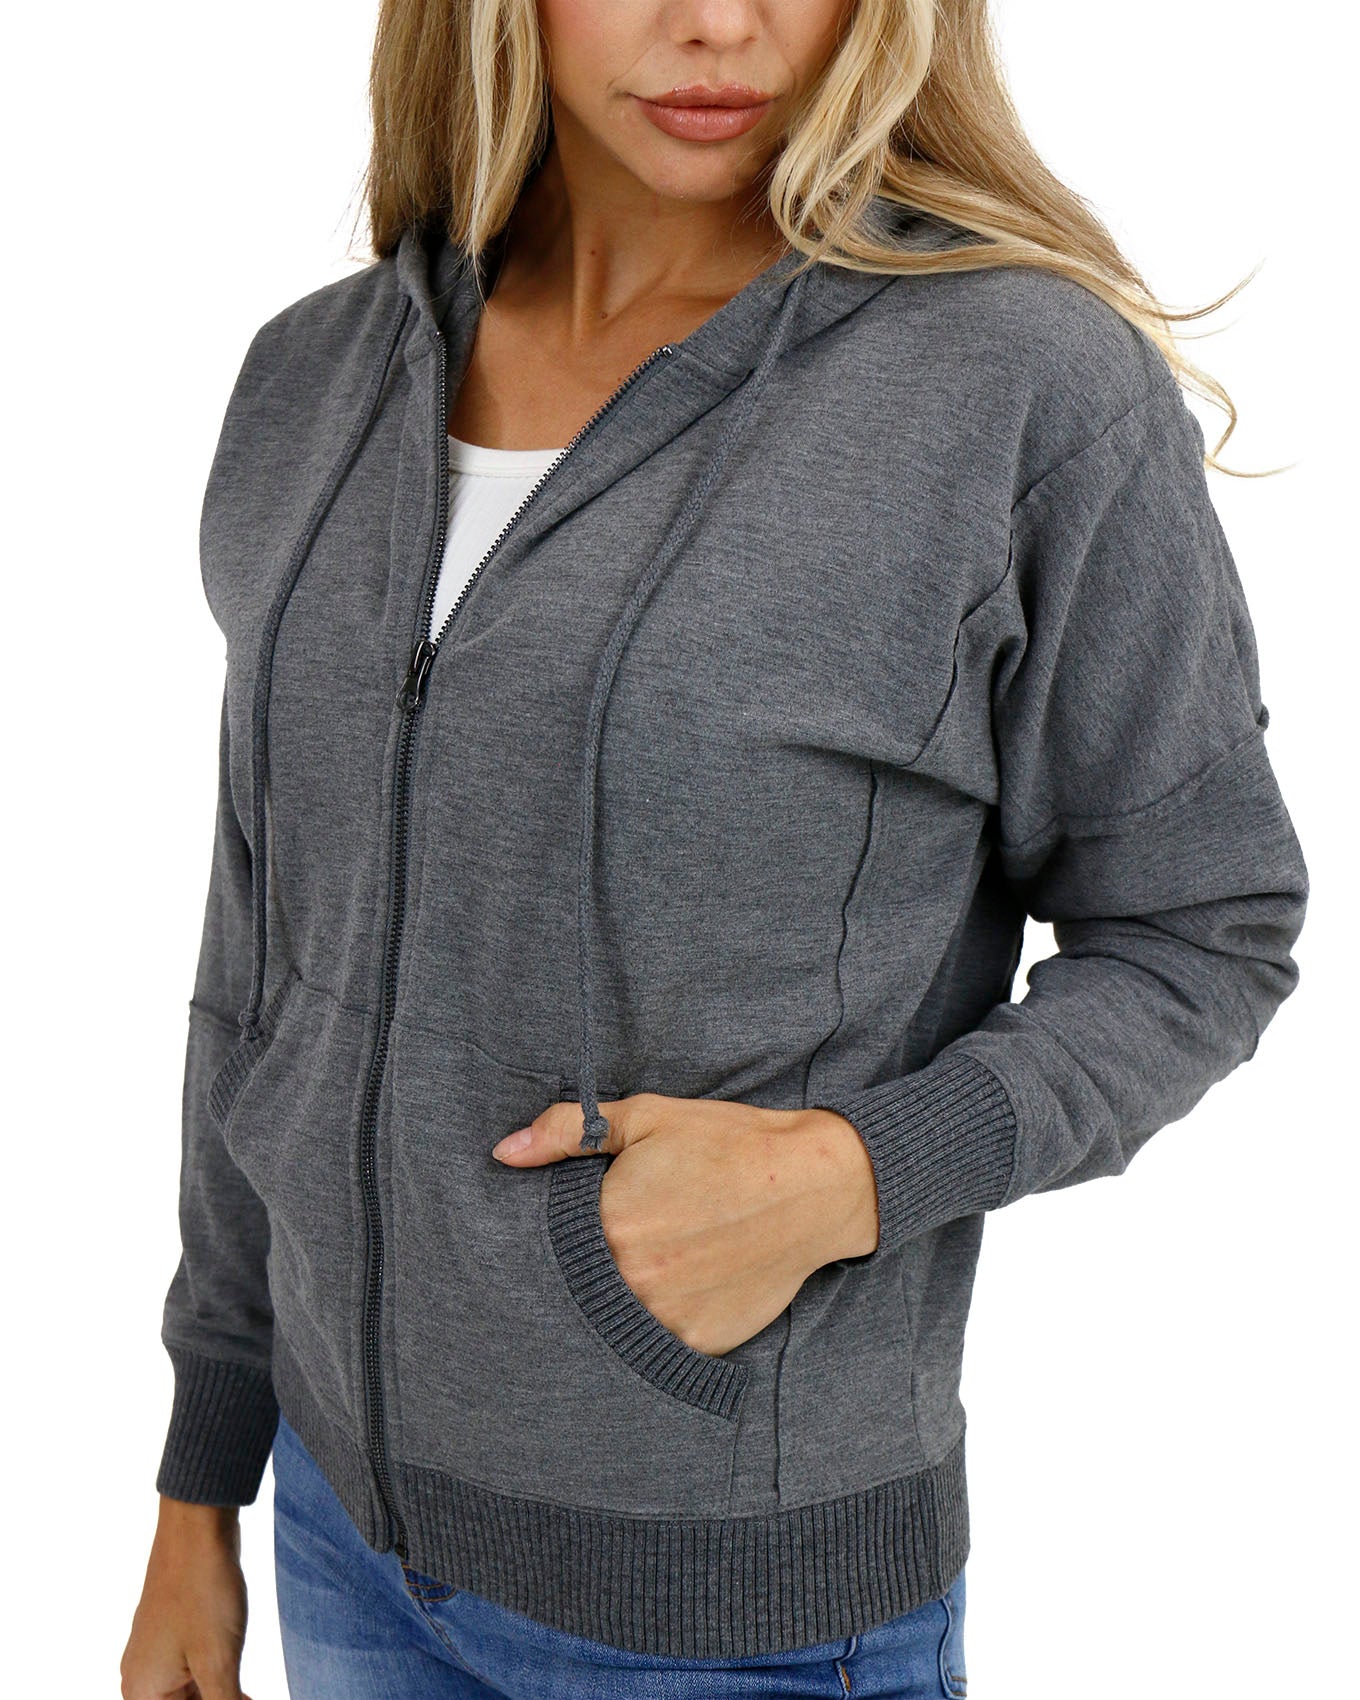 Signature Soft Heathered Charcoal Zip Up Hoodie - FINAL SALE